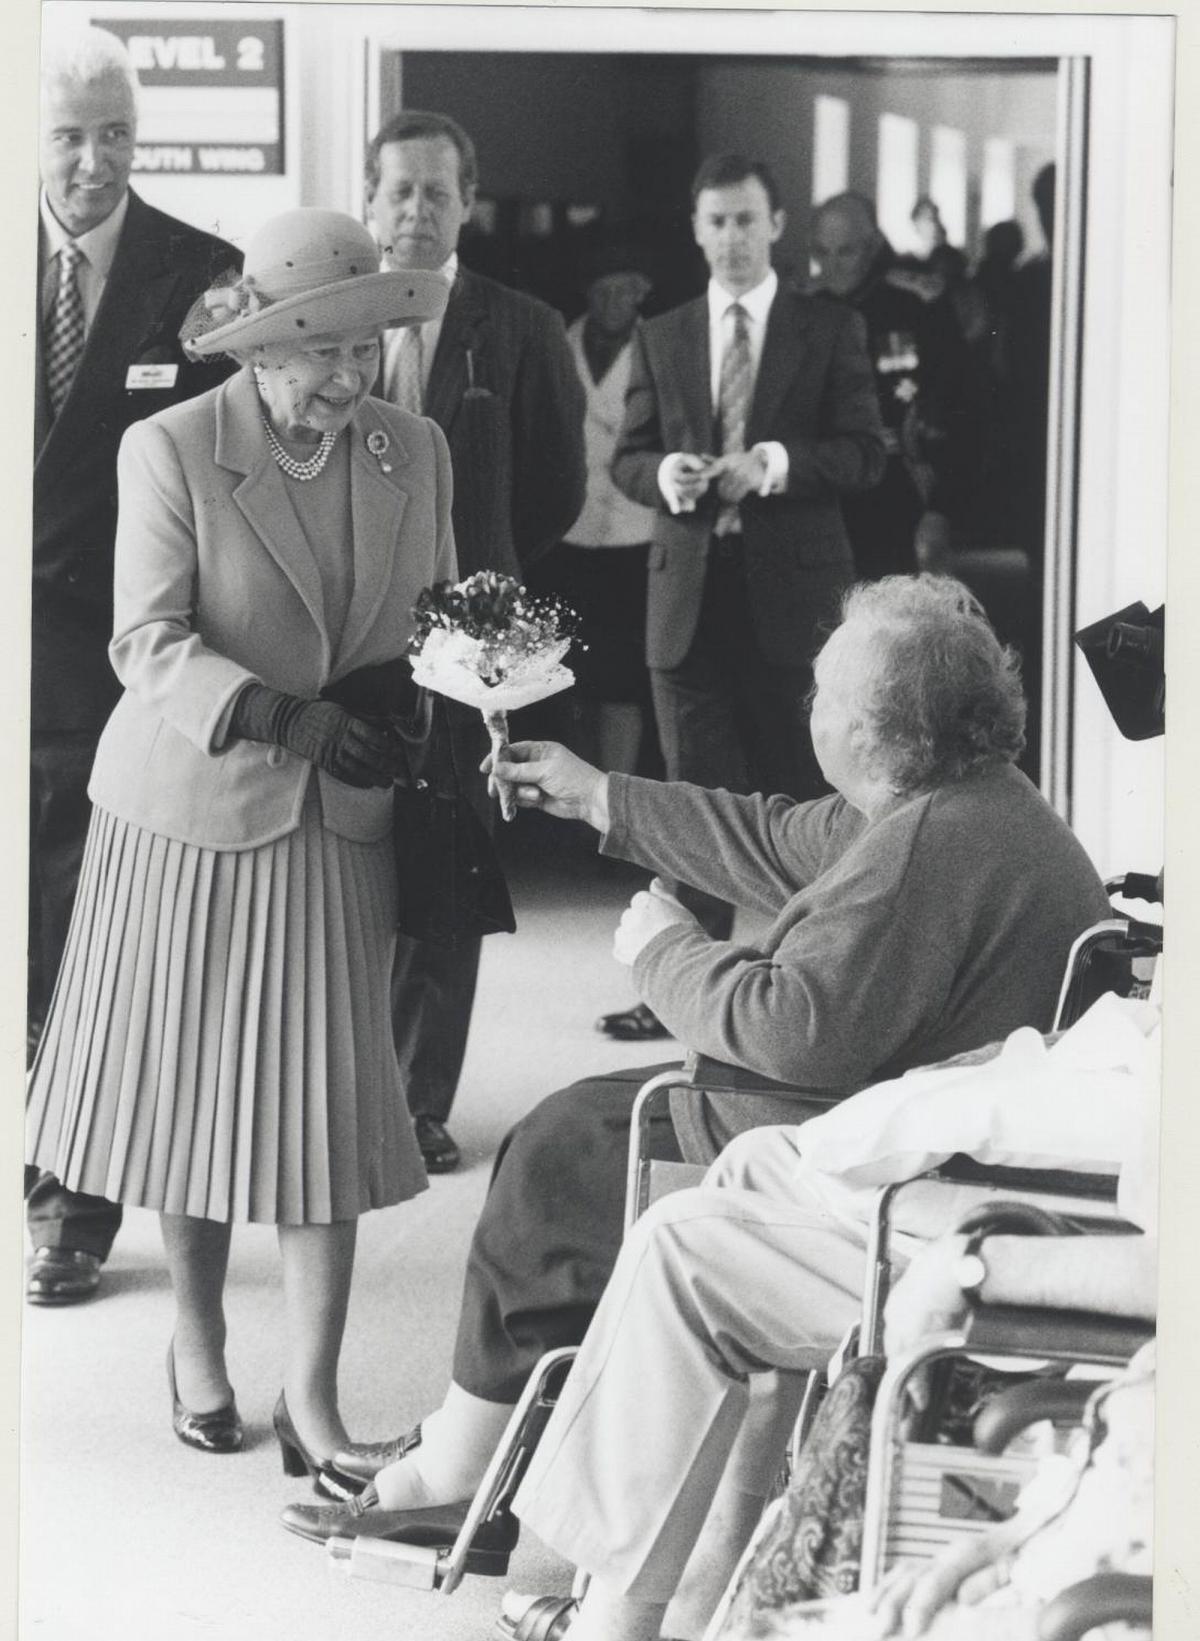 The Queen recieves a posey from a patient at DCH on her visit in 1998